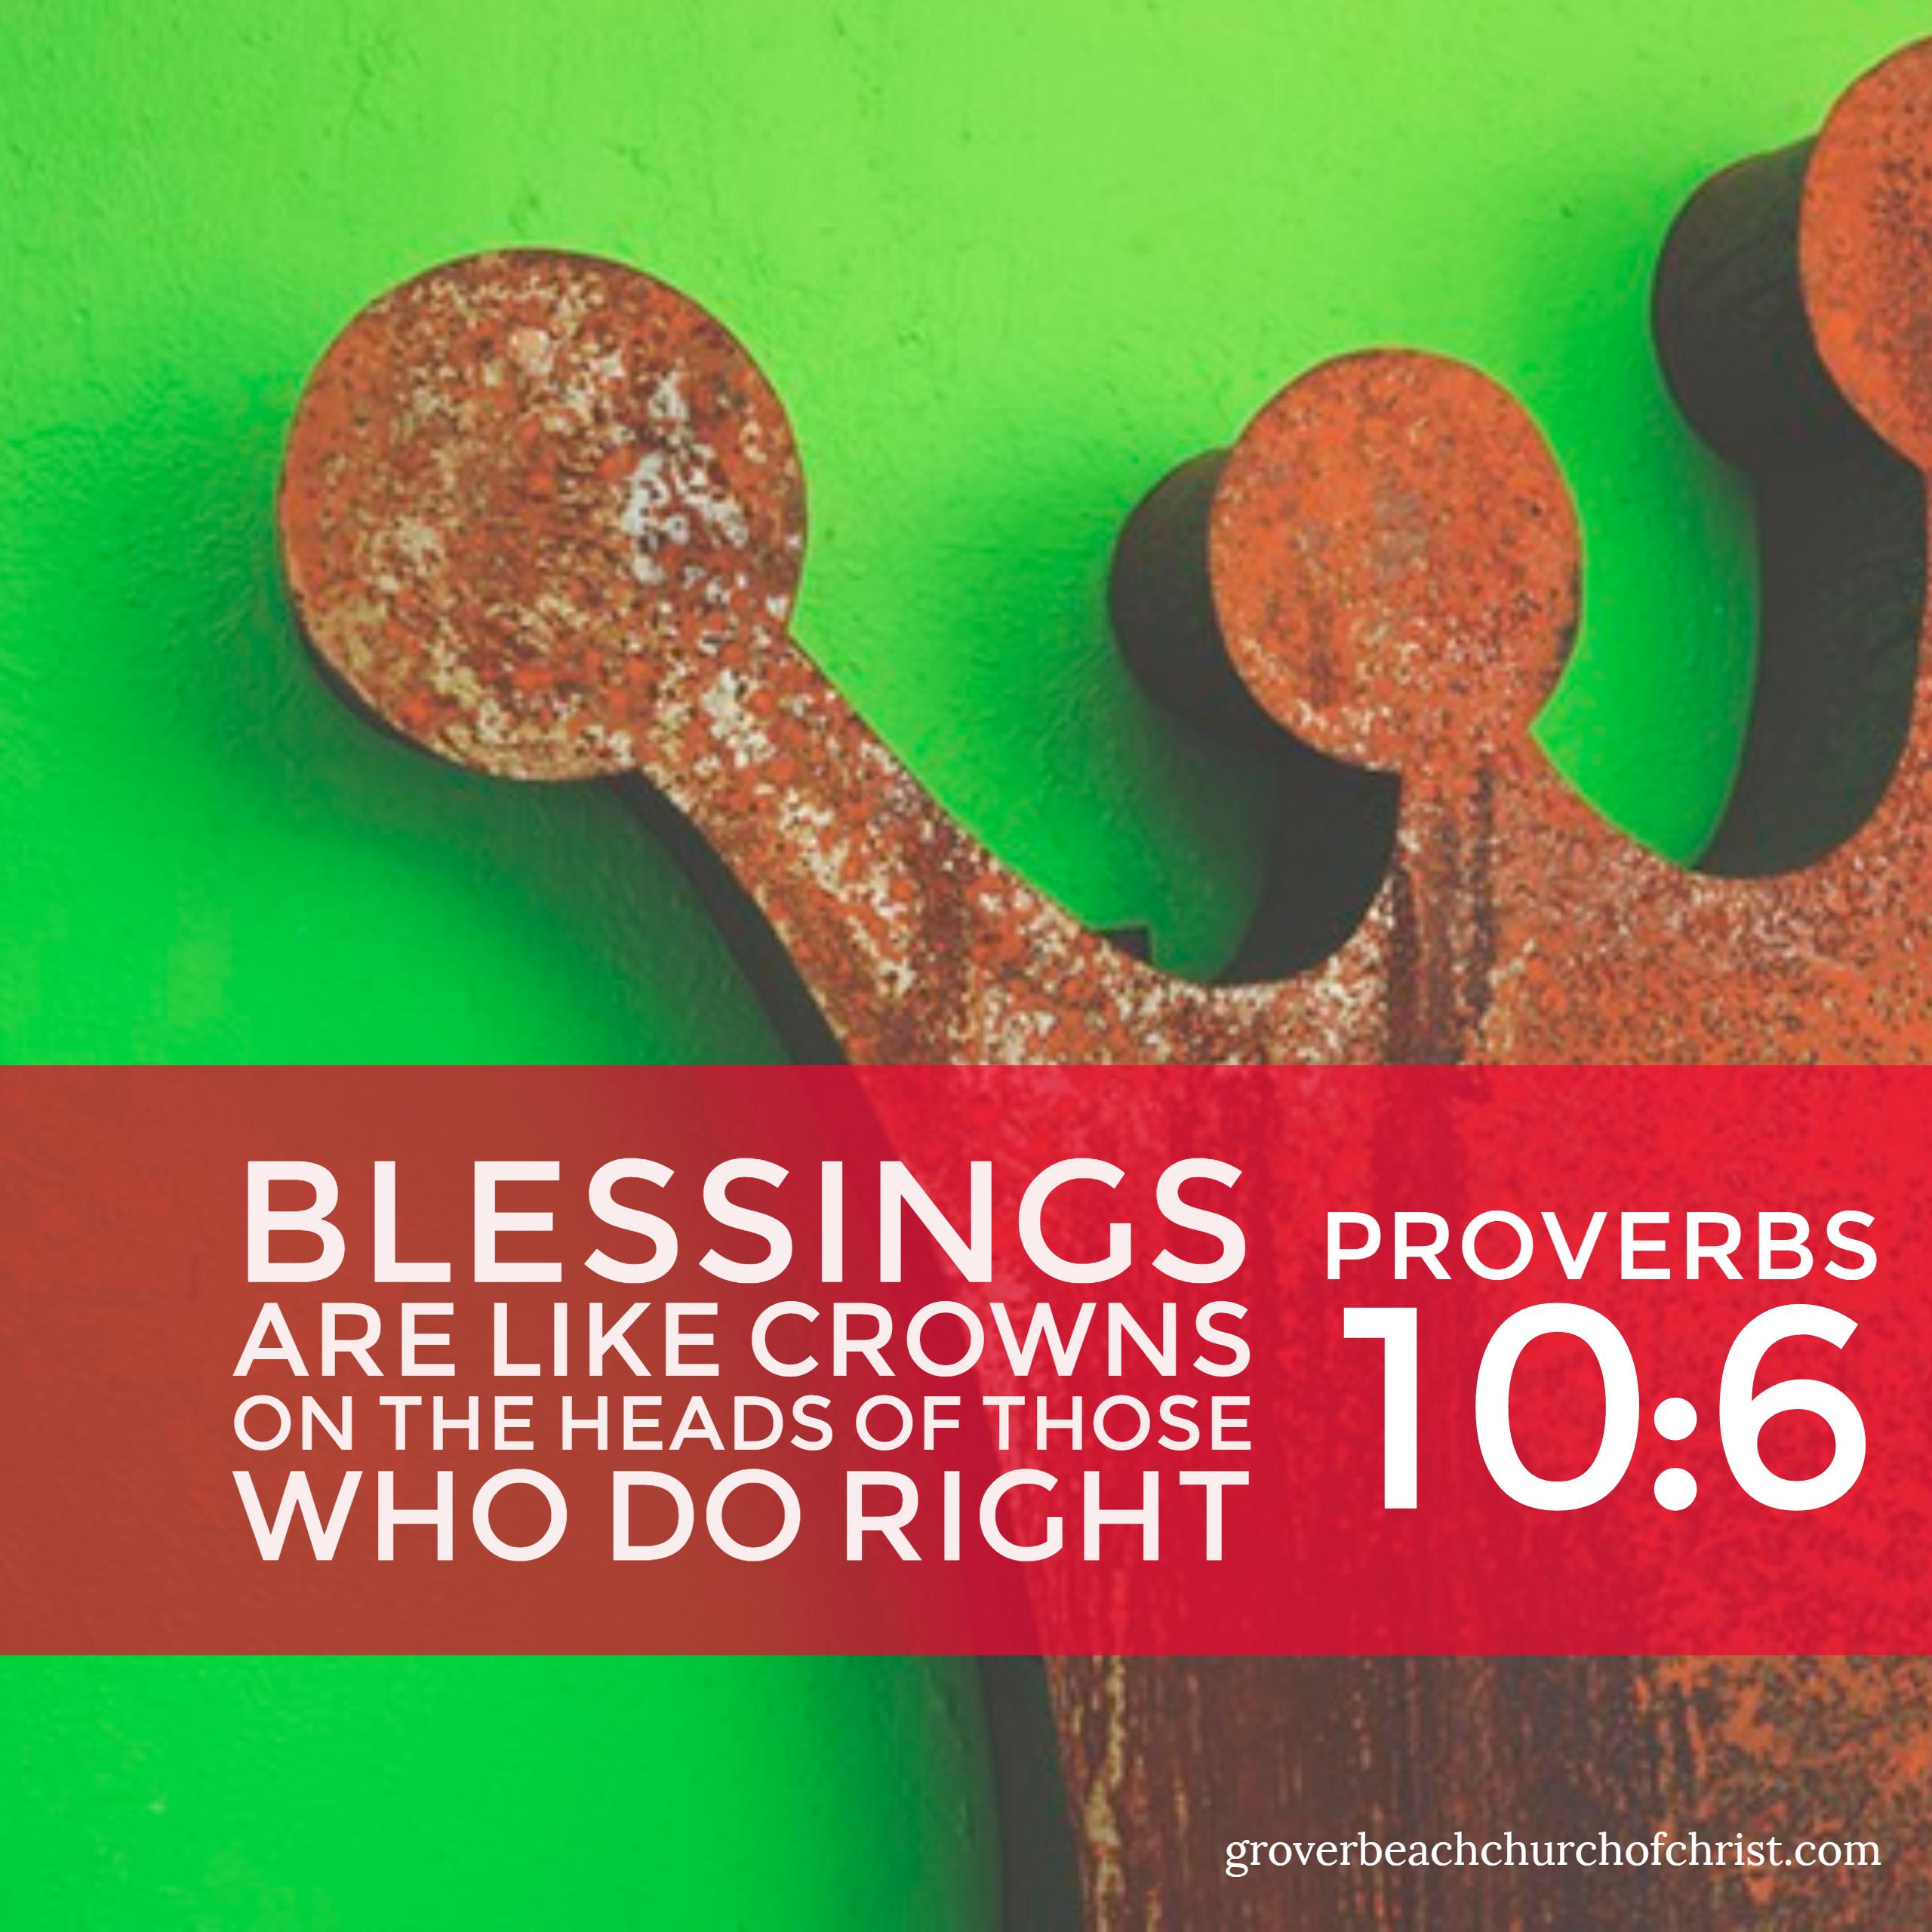 proverbs-10:6-blessings-are-like-crowns